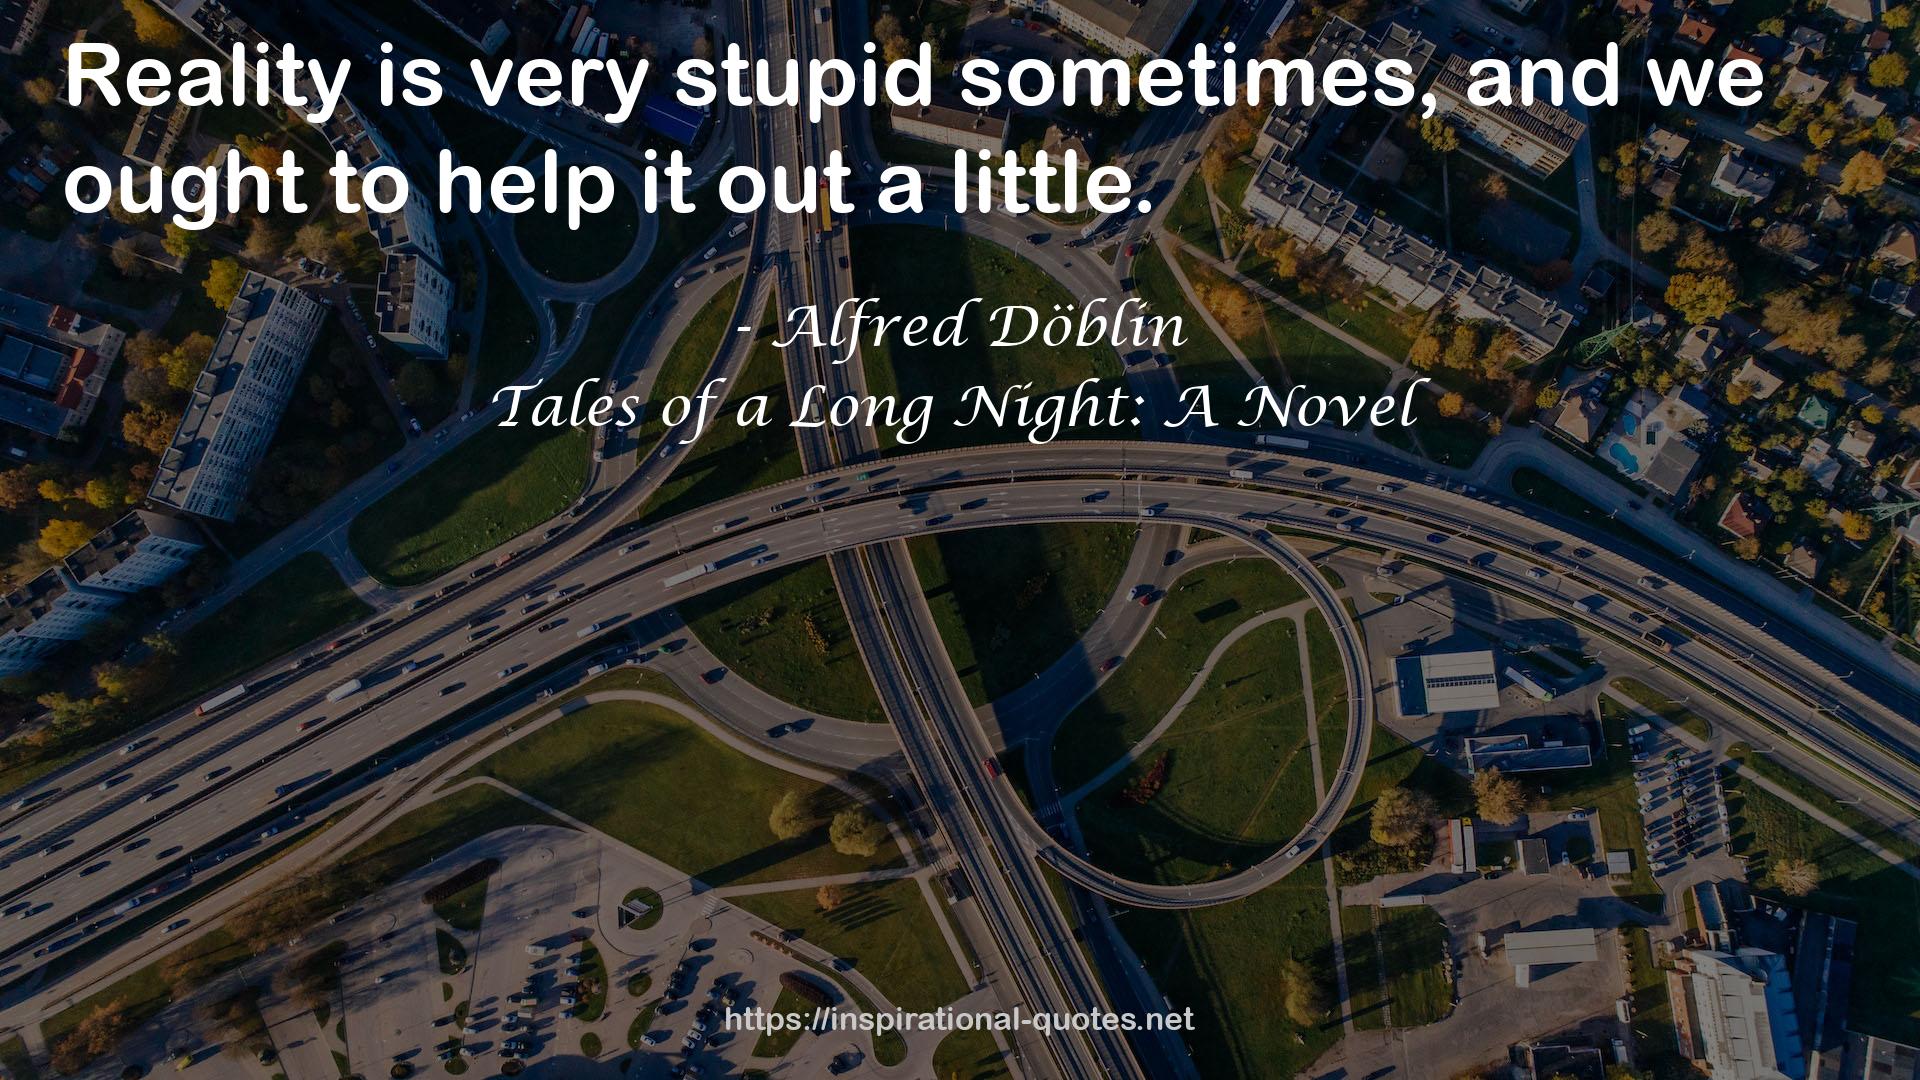 Tales of a Long Night: A Novel QUOTES